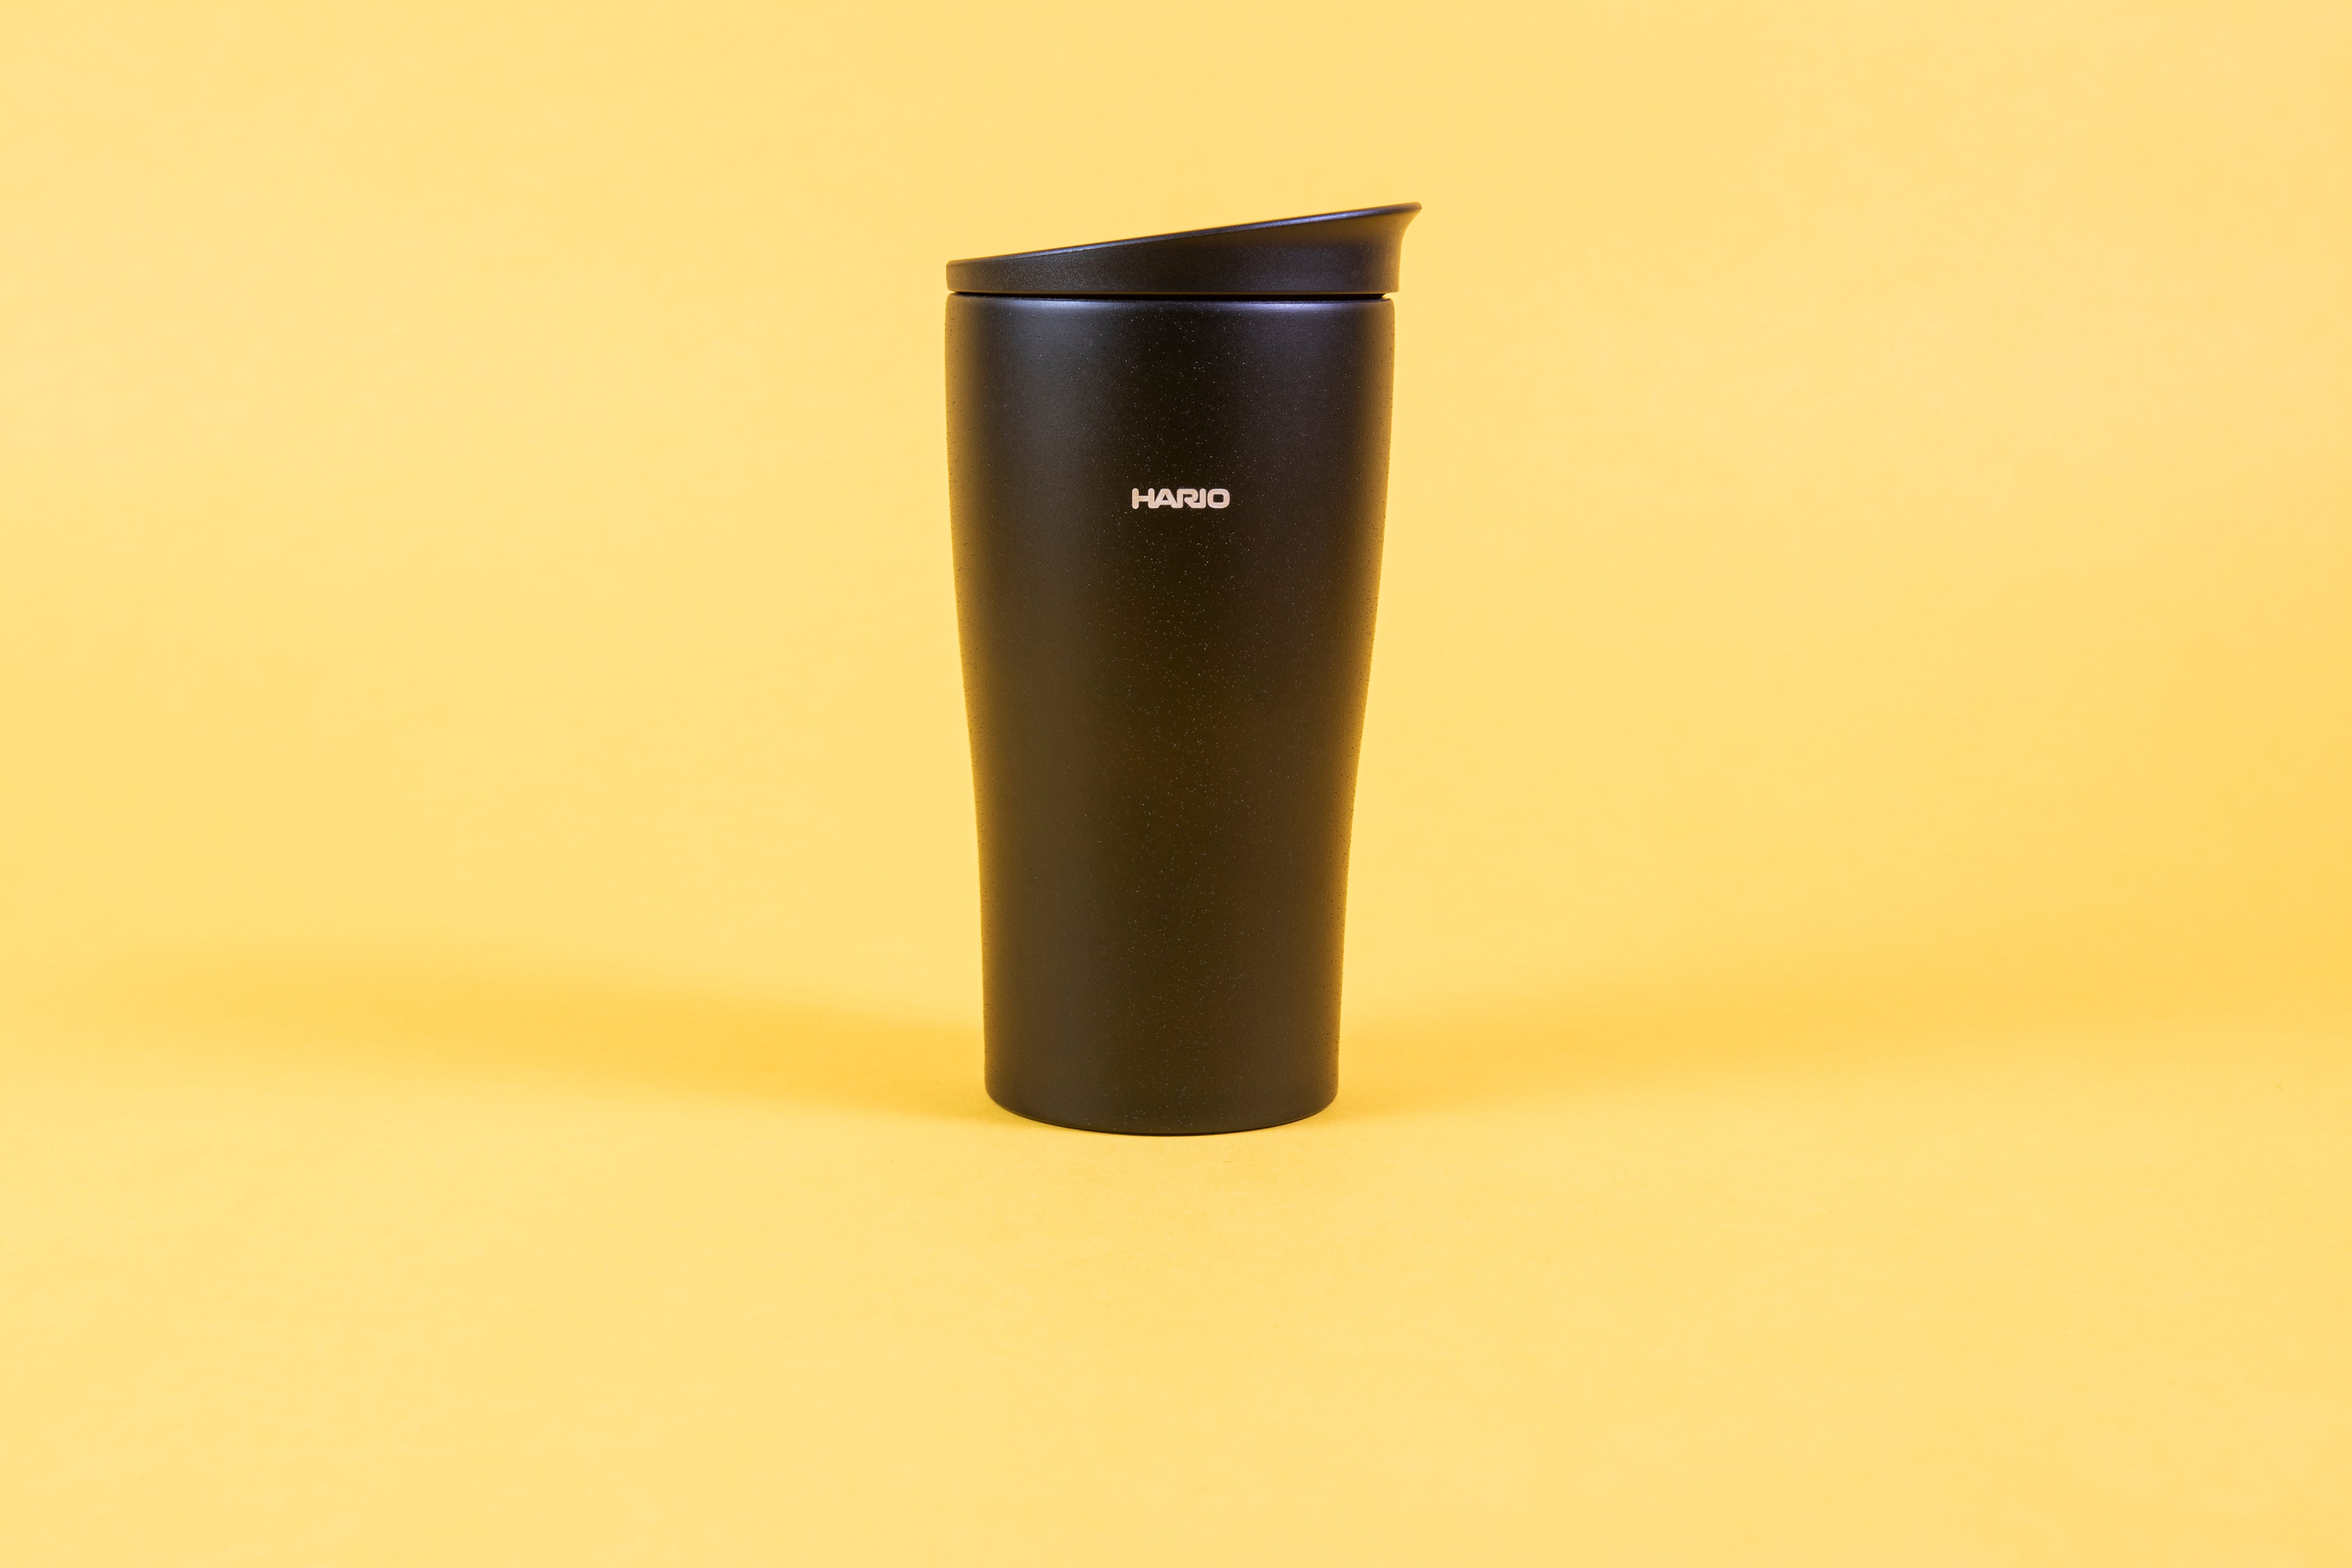 Textured black coffee tumbler with white Hario logo and black lid.